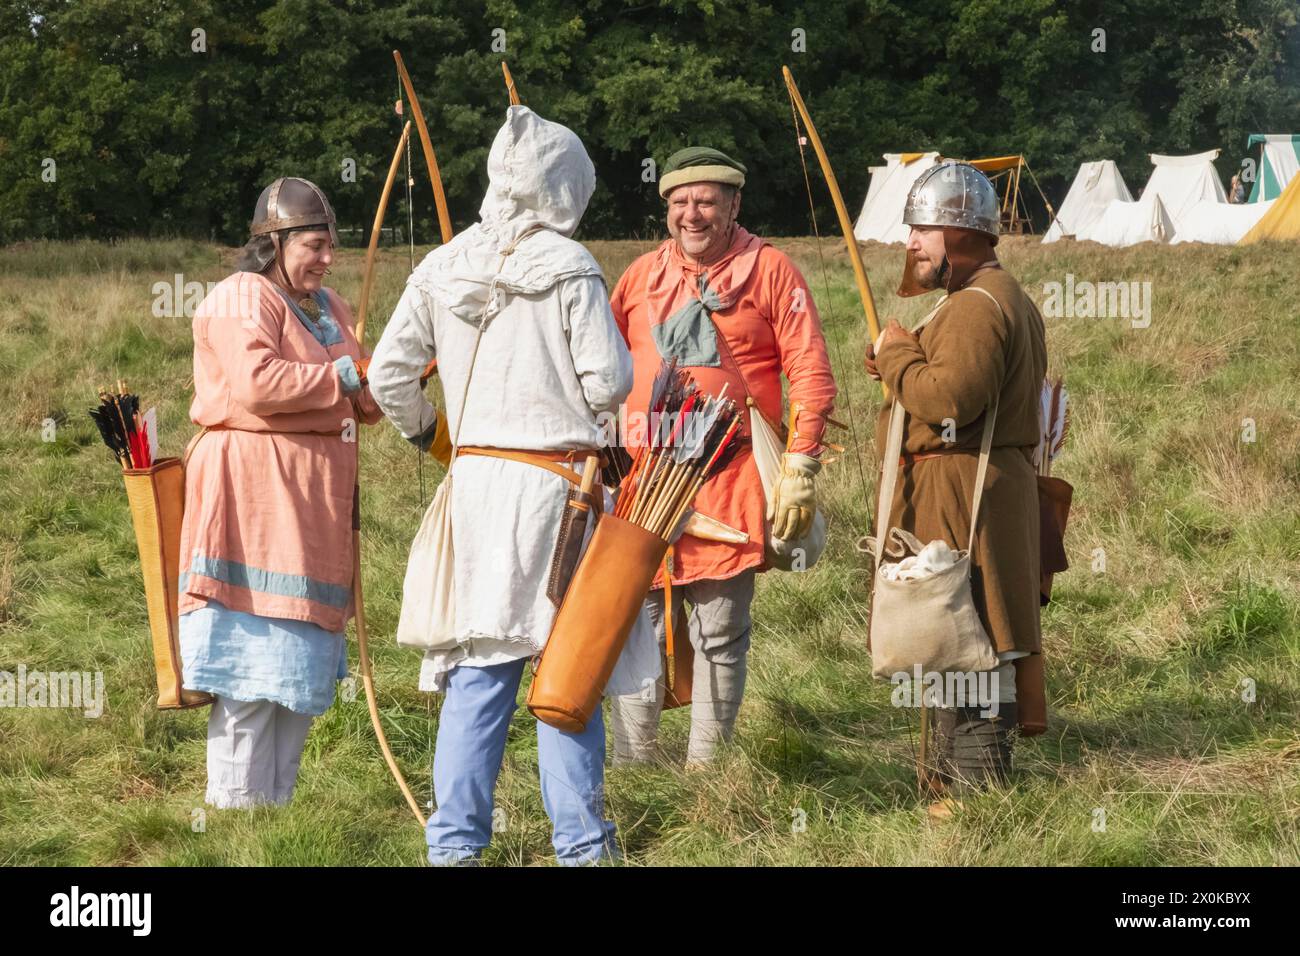 England, East Sussex, Battle, The Annual October Battle of Hastings Re-Enactment Festival, Group of Archers Dressed in Medieval Costume Foto Stock